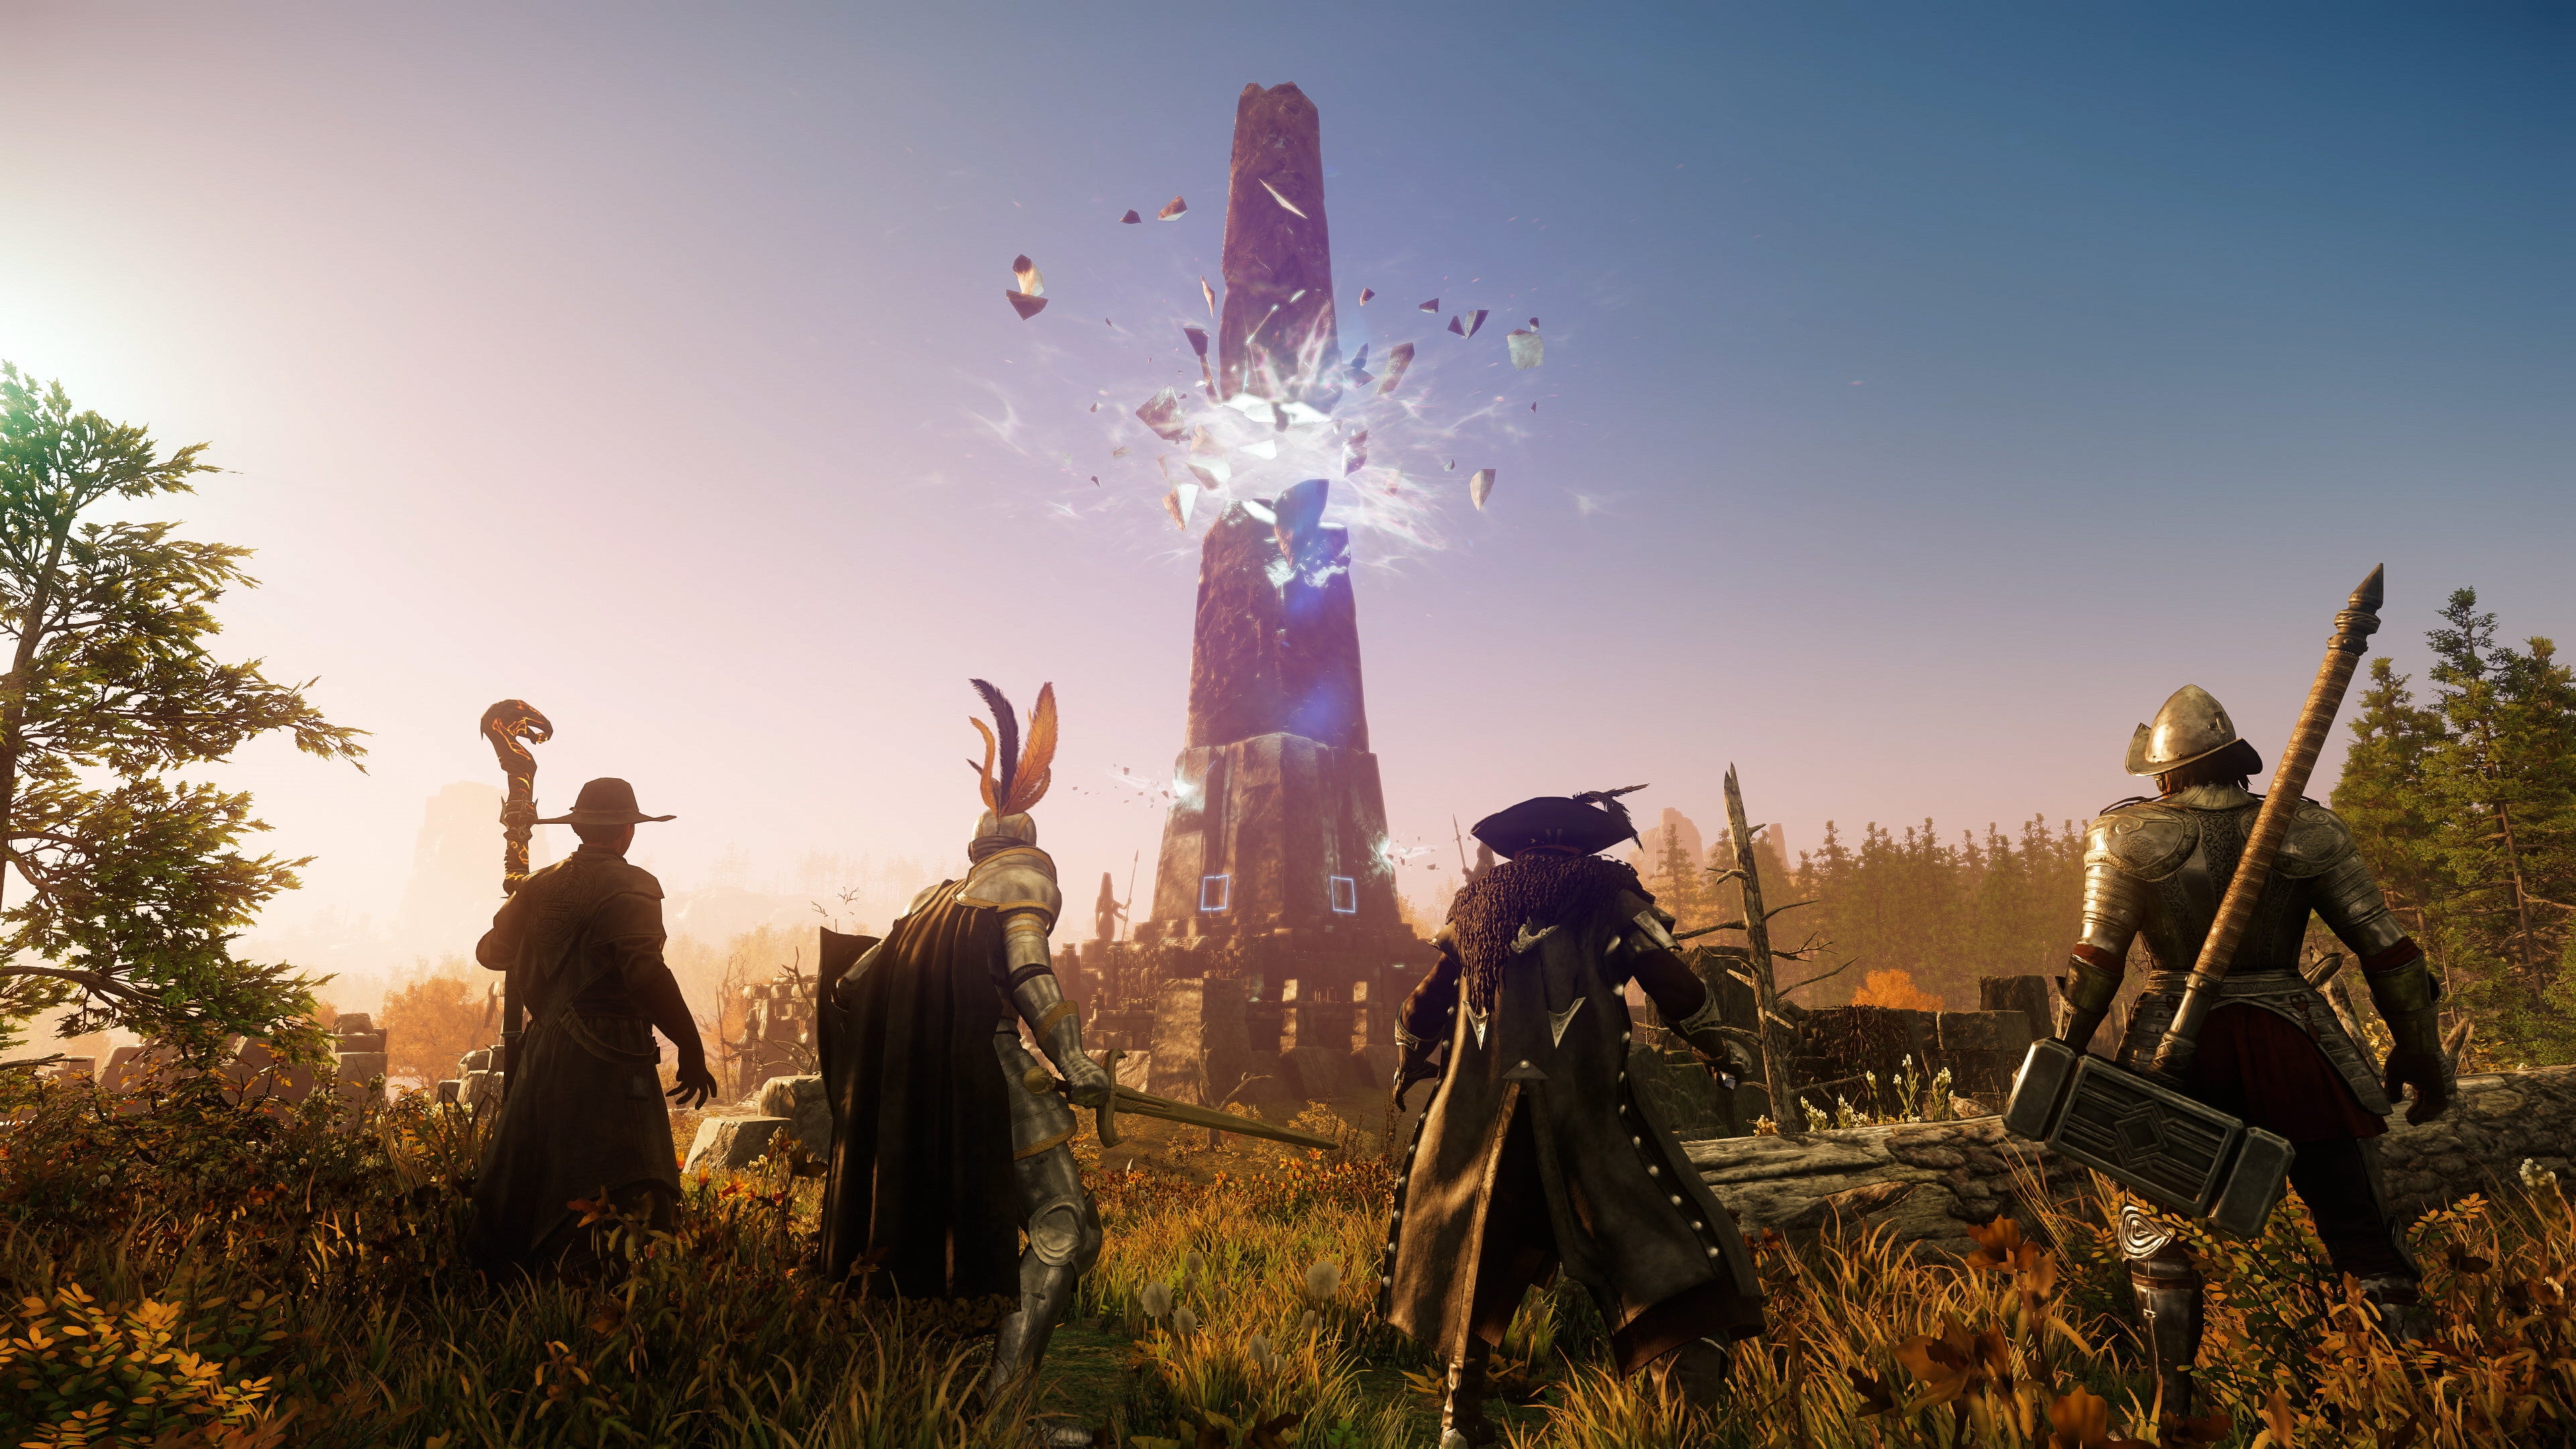 A party gather before a glowing obelisk in a New World screenshot.